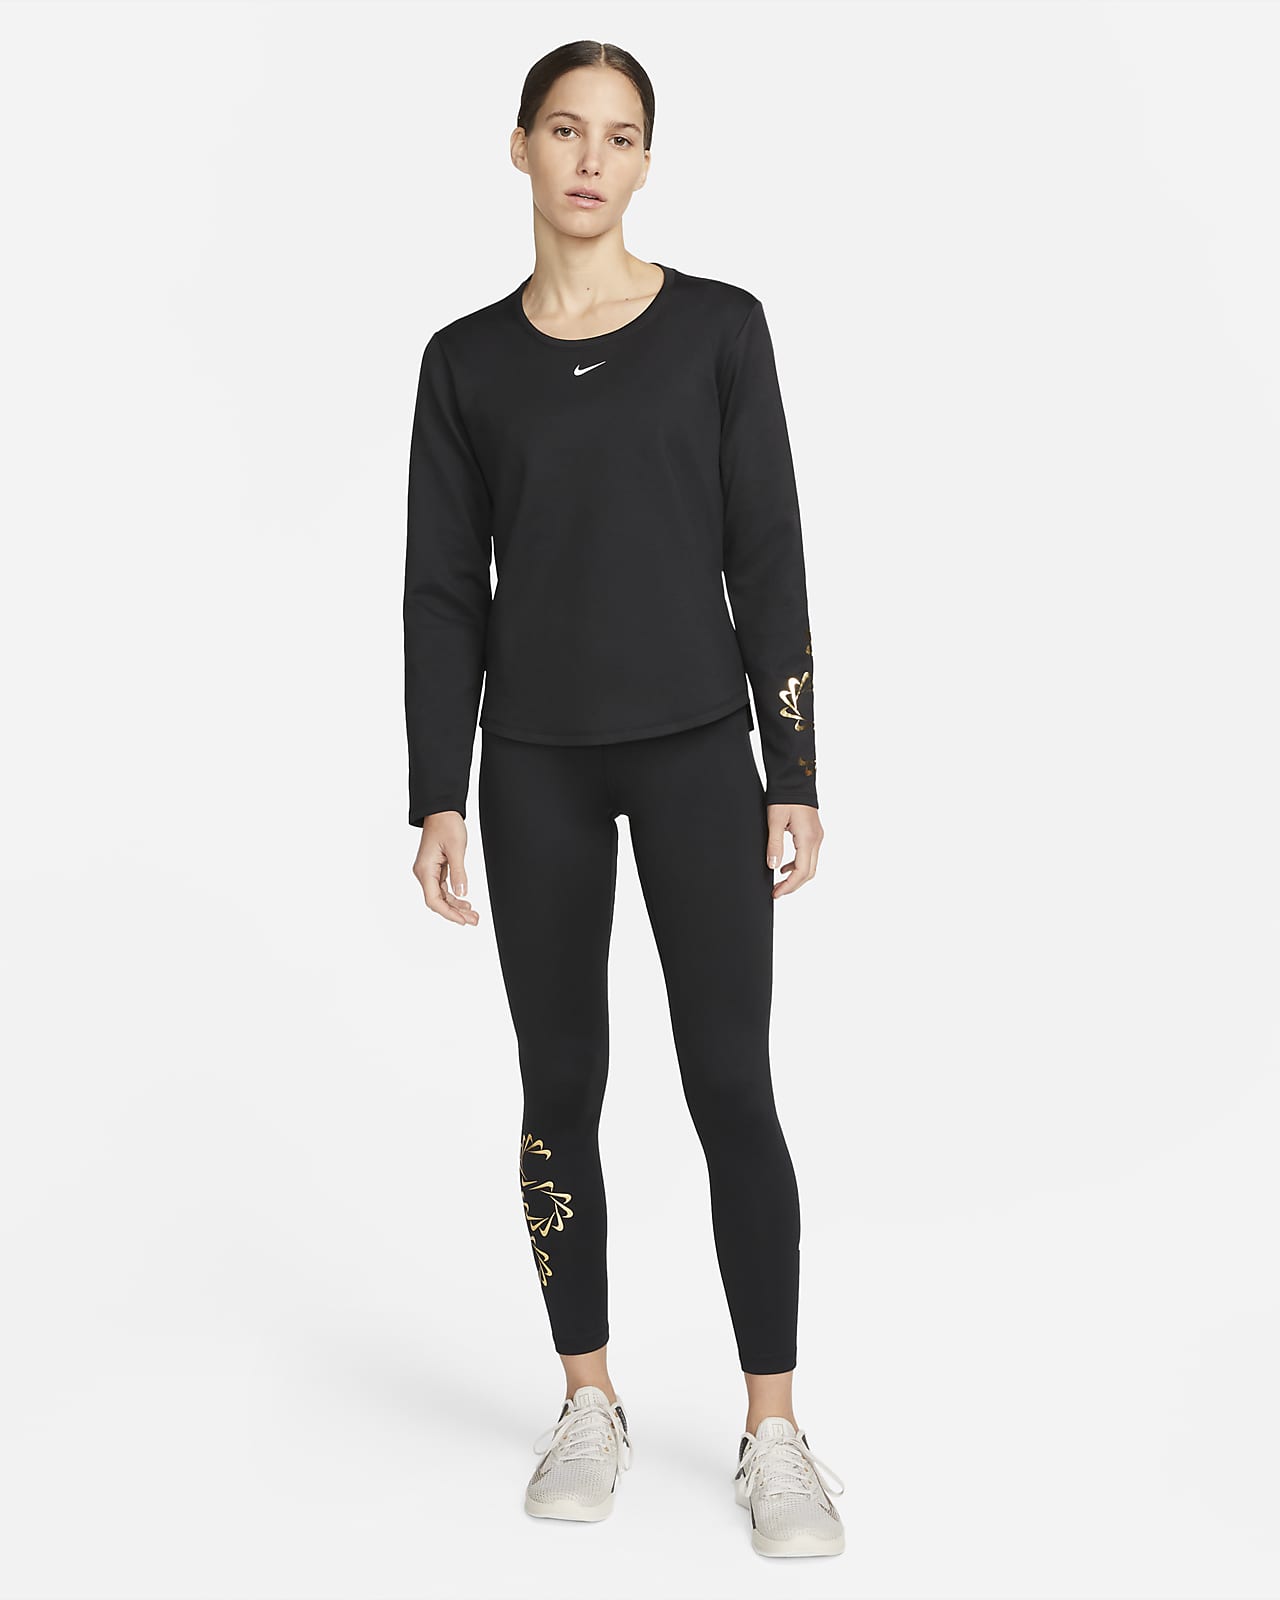 Recuerdo voltereta detective Nike Therma-FIT One Women's Graphic Long-Sleeve Top. Nike.com